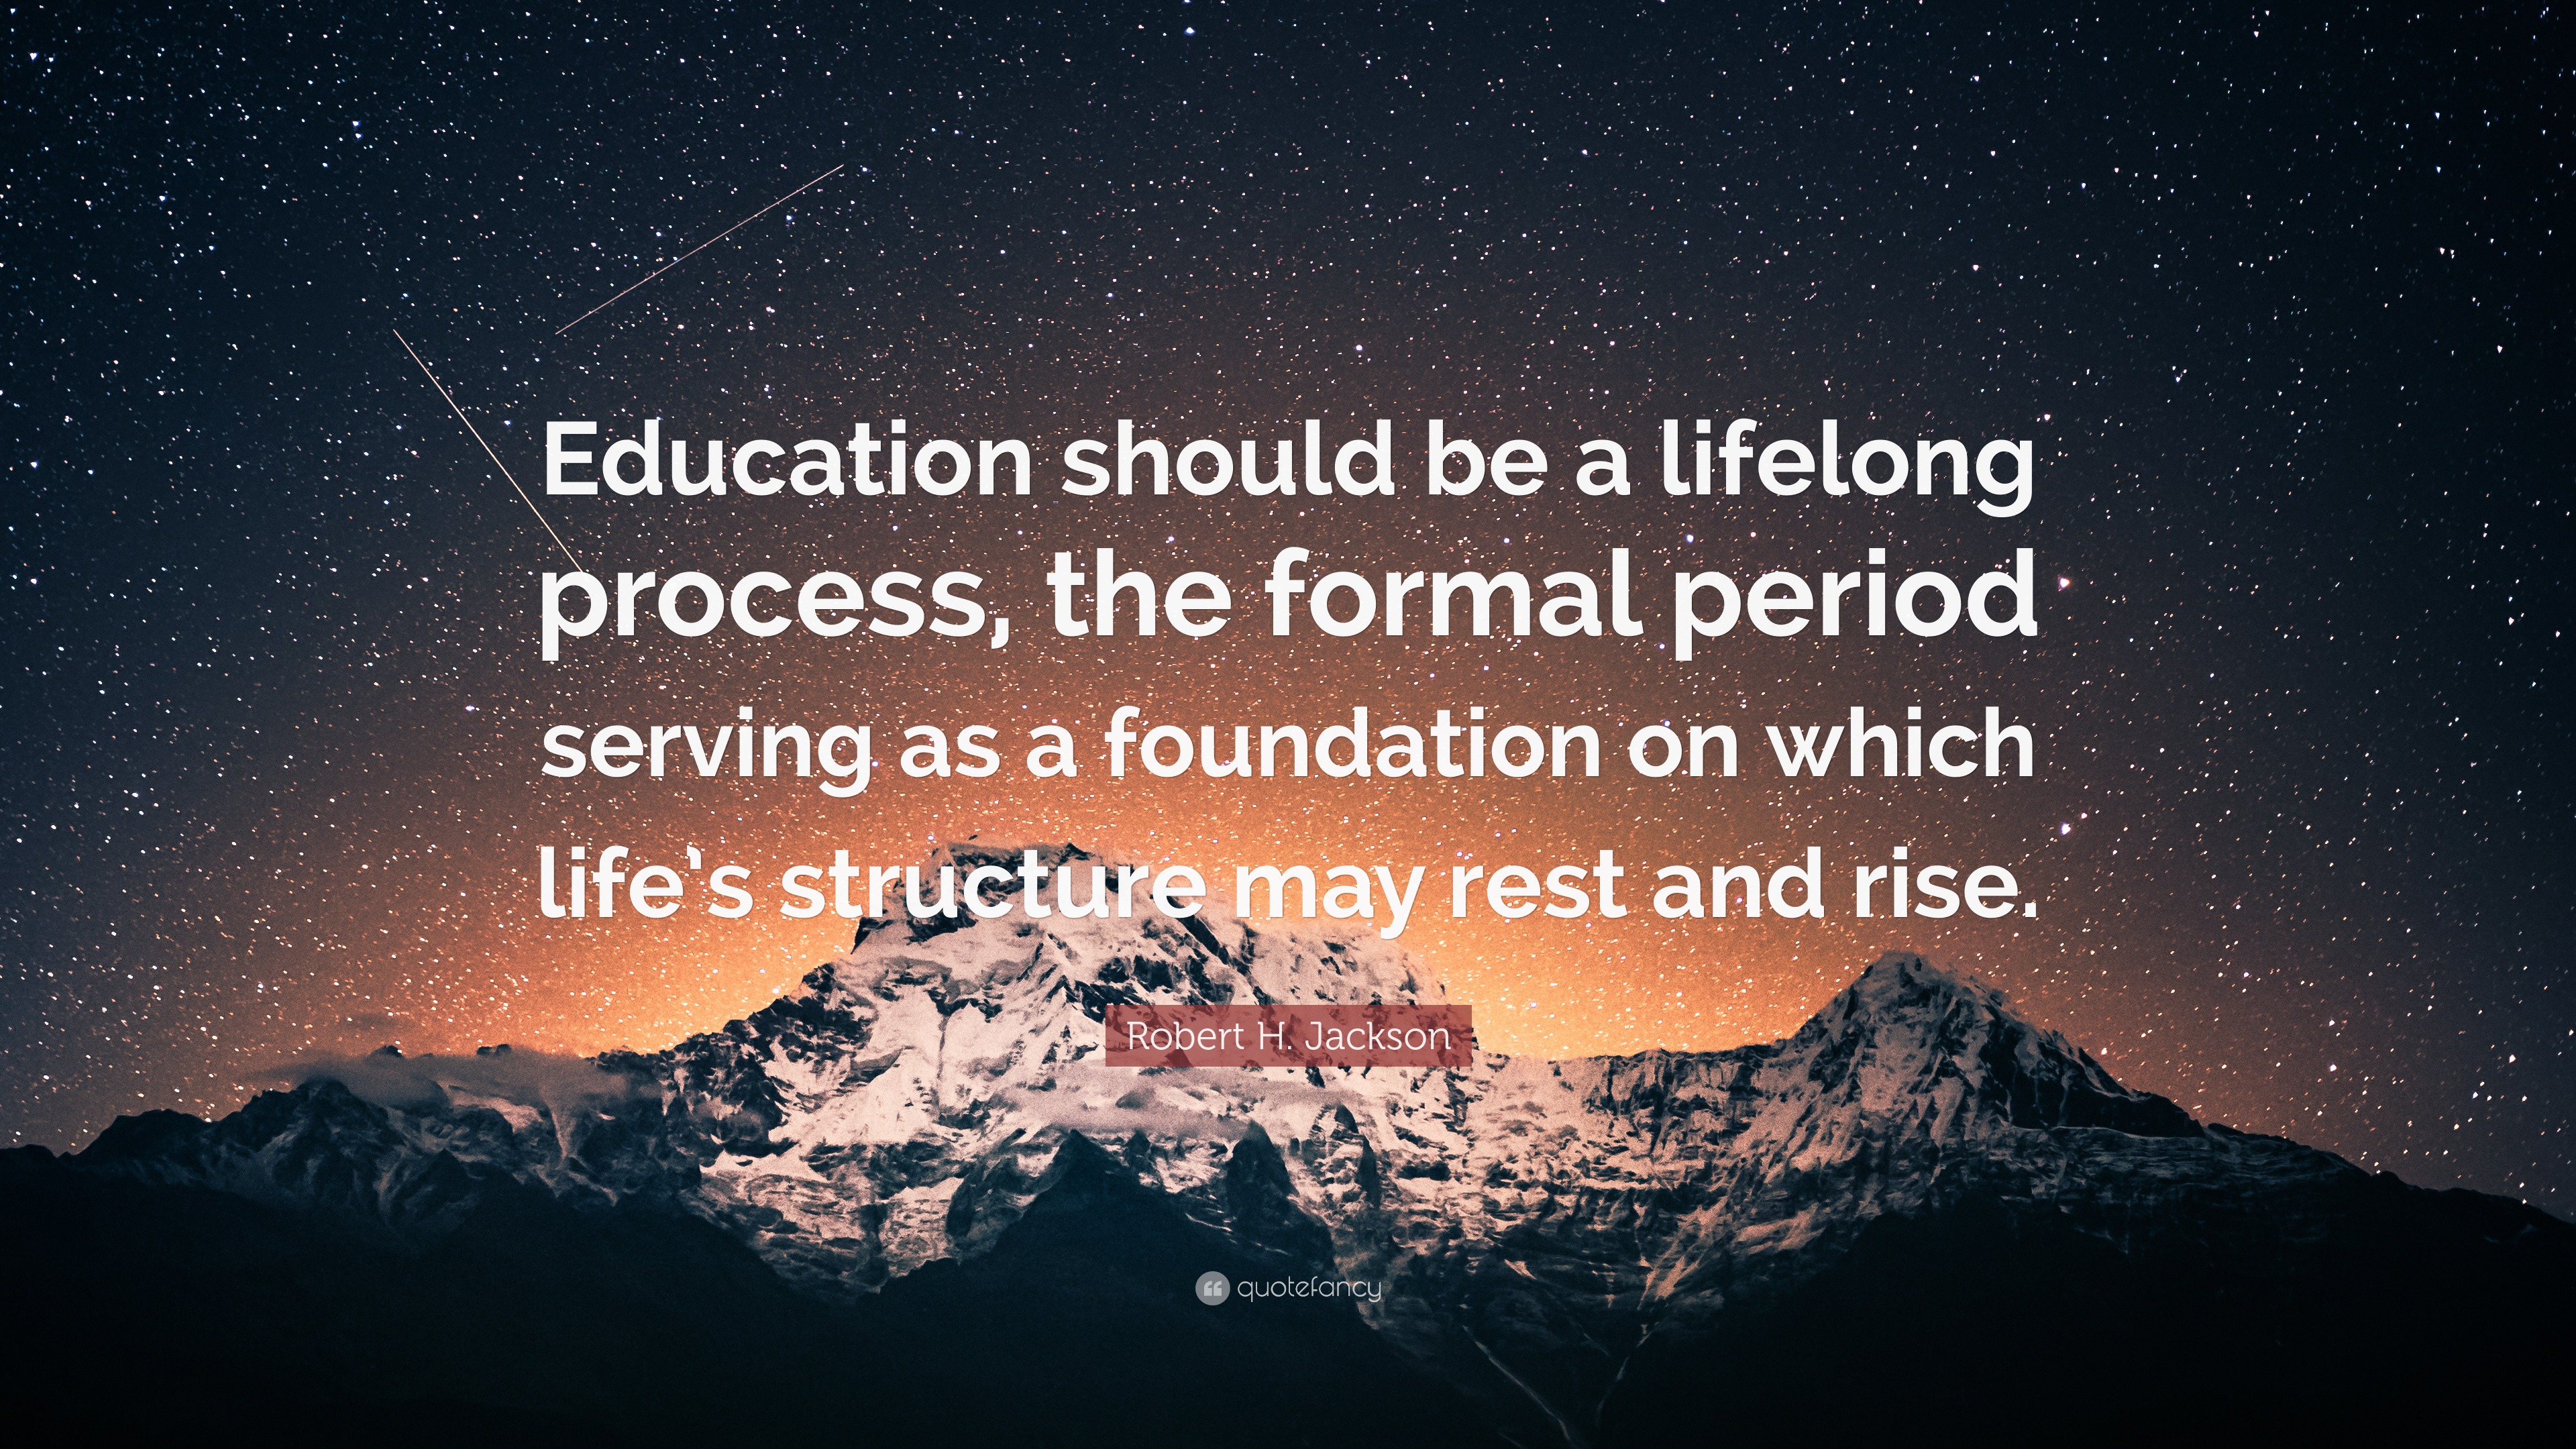 education is a continual lifelong process